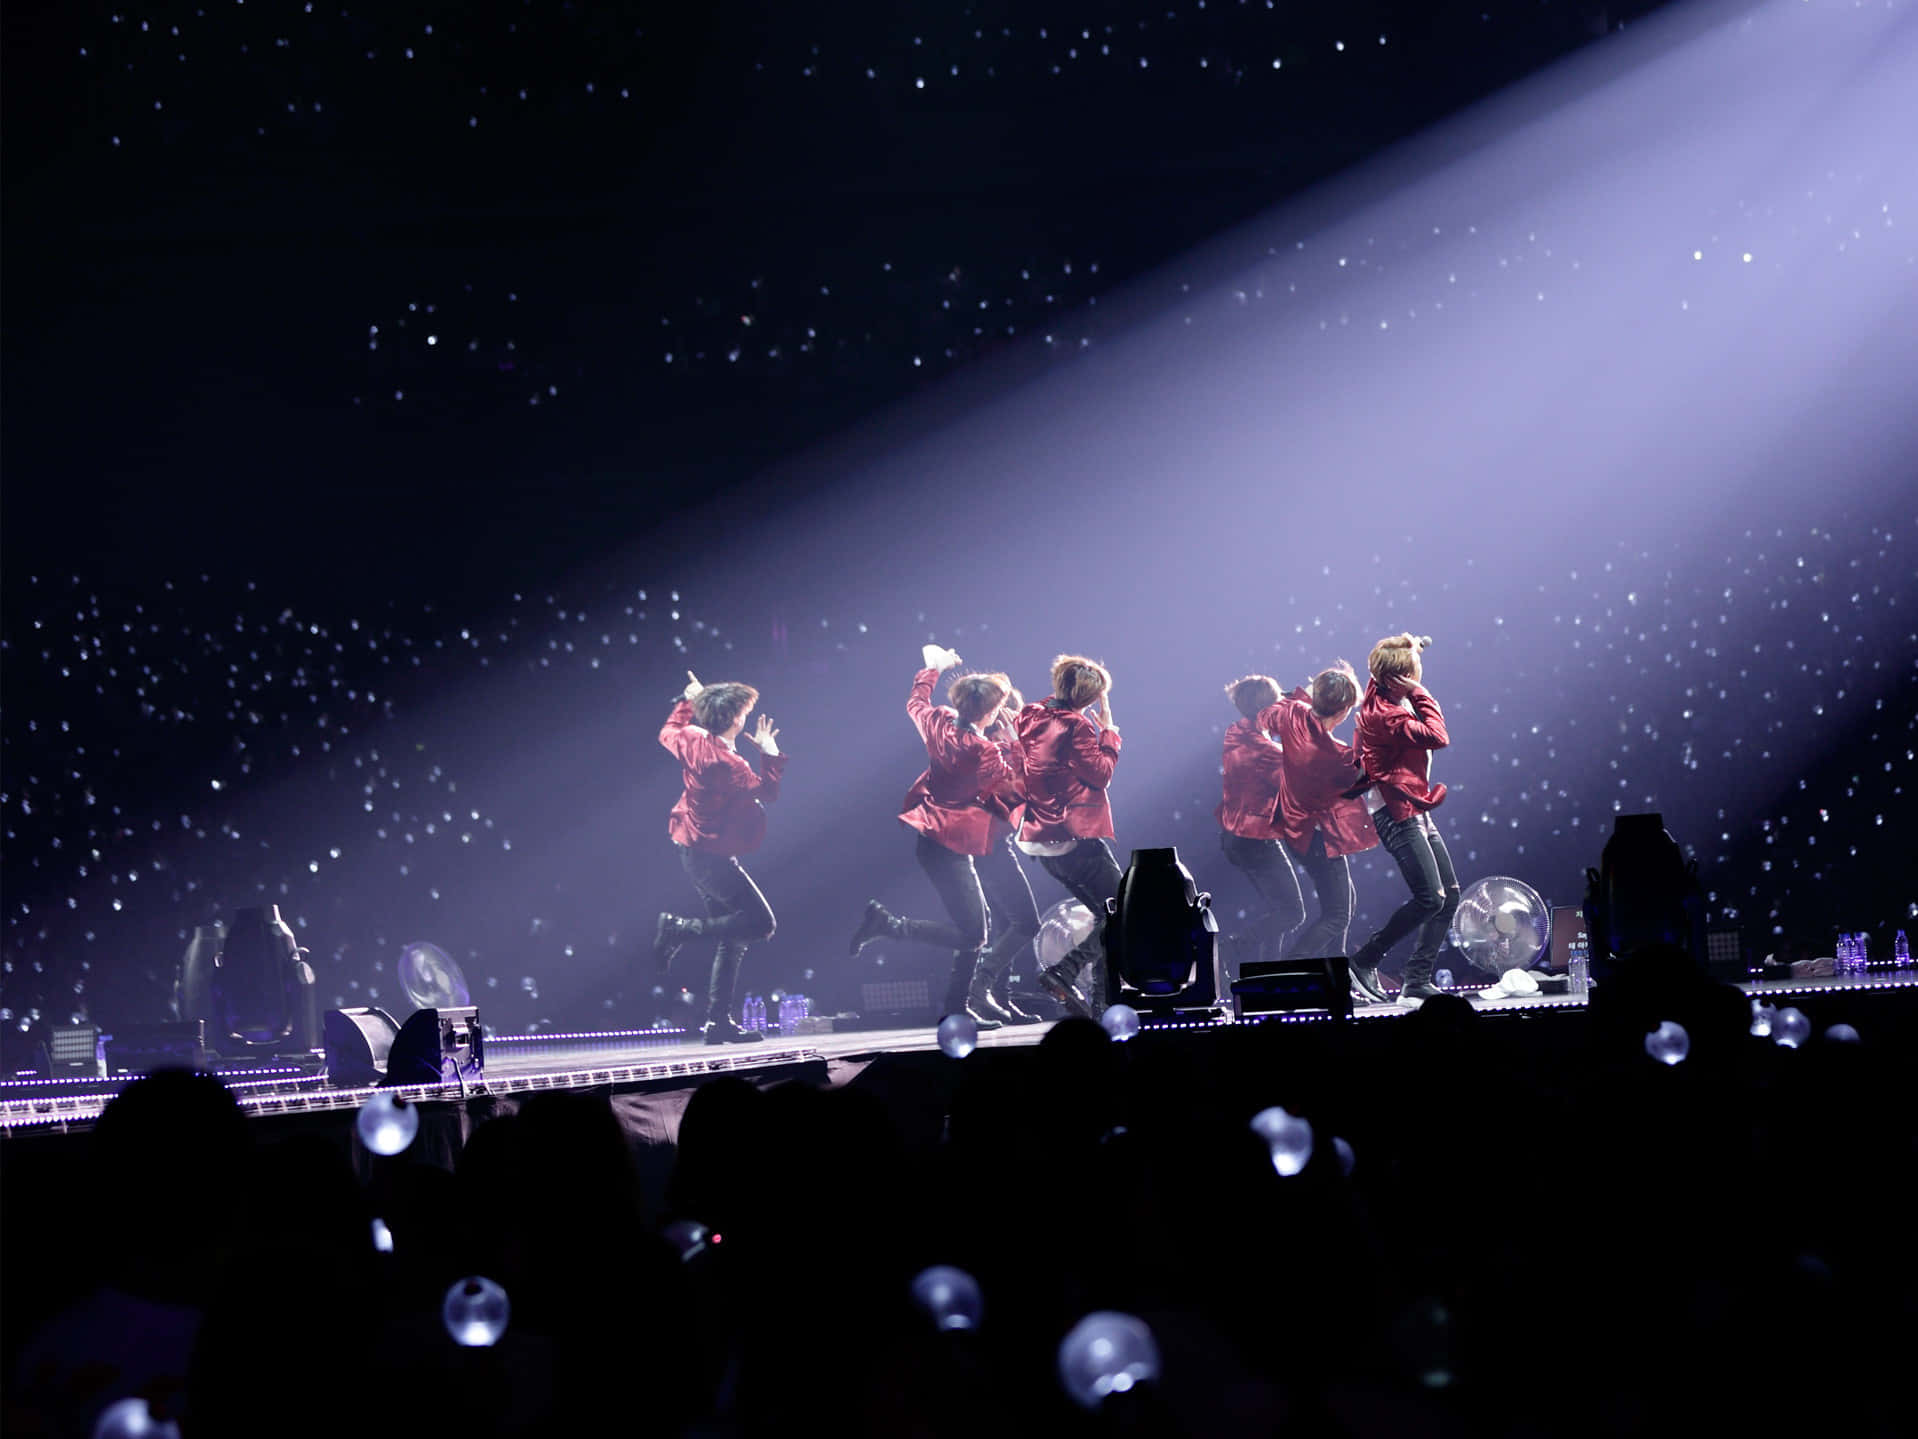 Iconic Bts Performance On Concert Stage Wallpaper